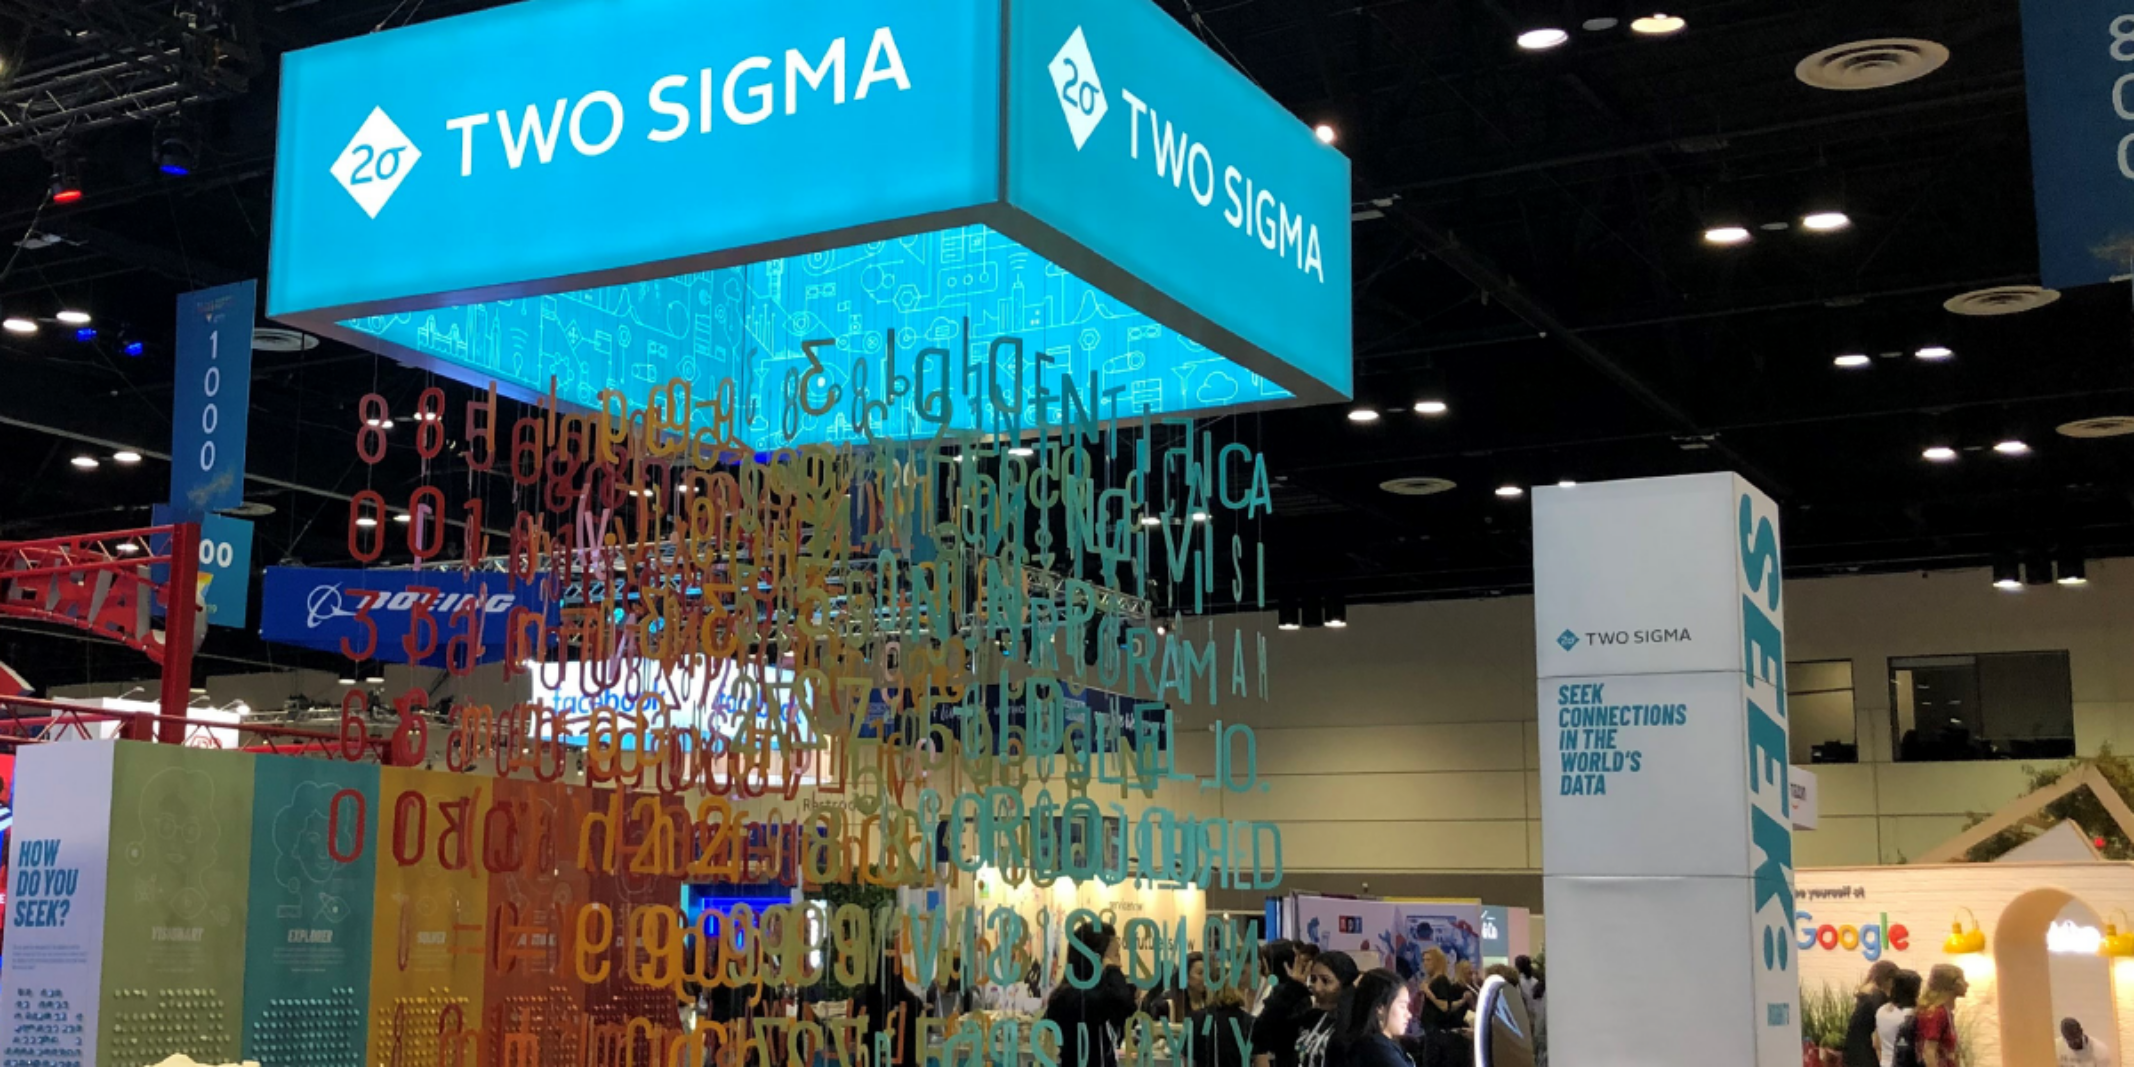 The Two Sigma booth at the Grace Hopper Celebration with a central installation which has hanging multicolored data with the illusion of floating.